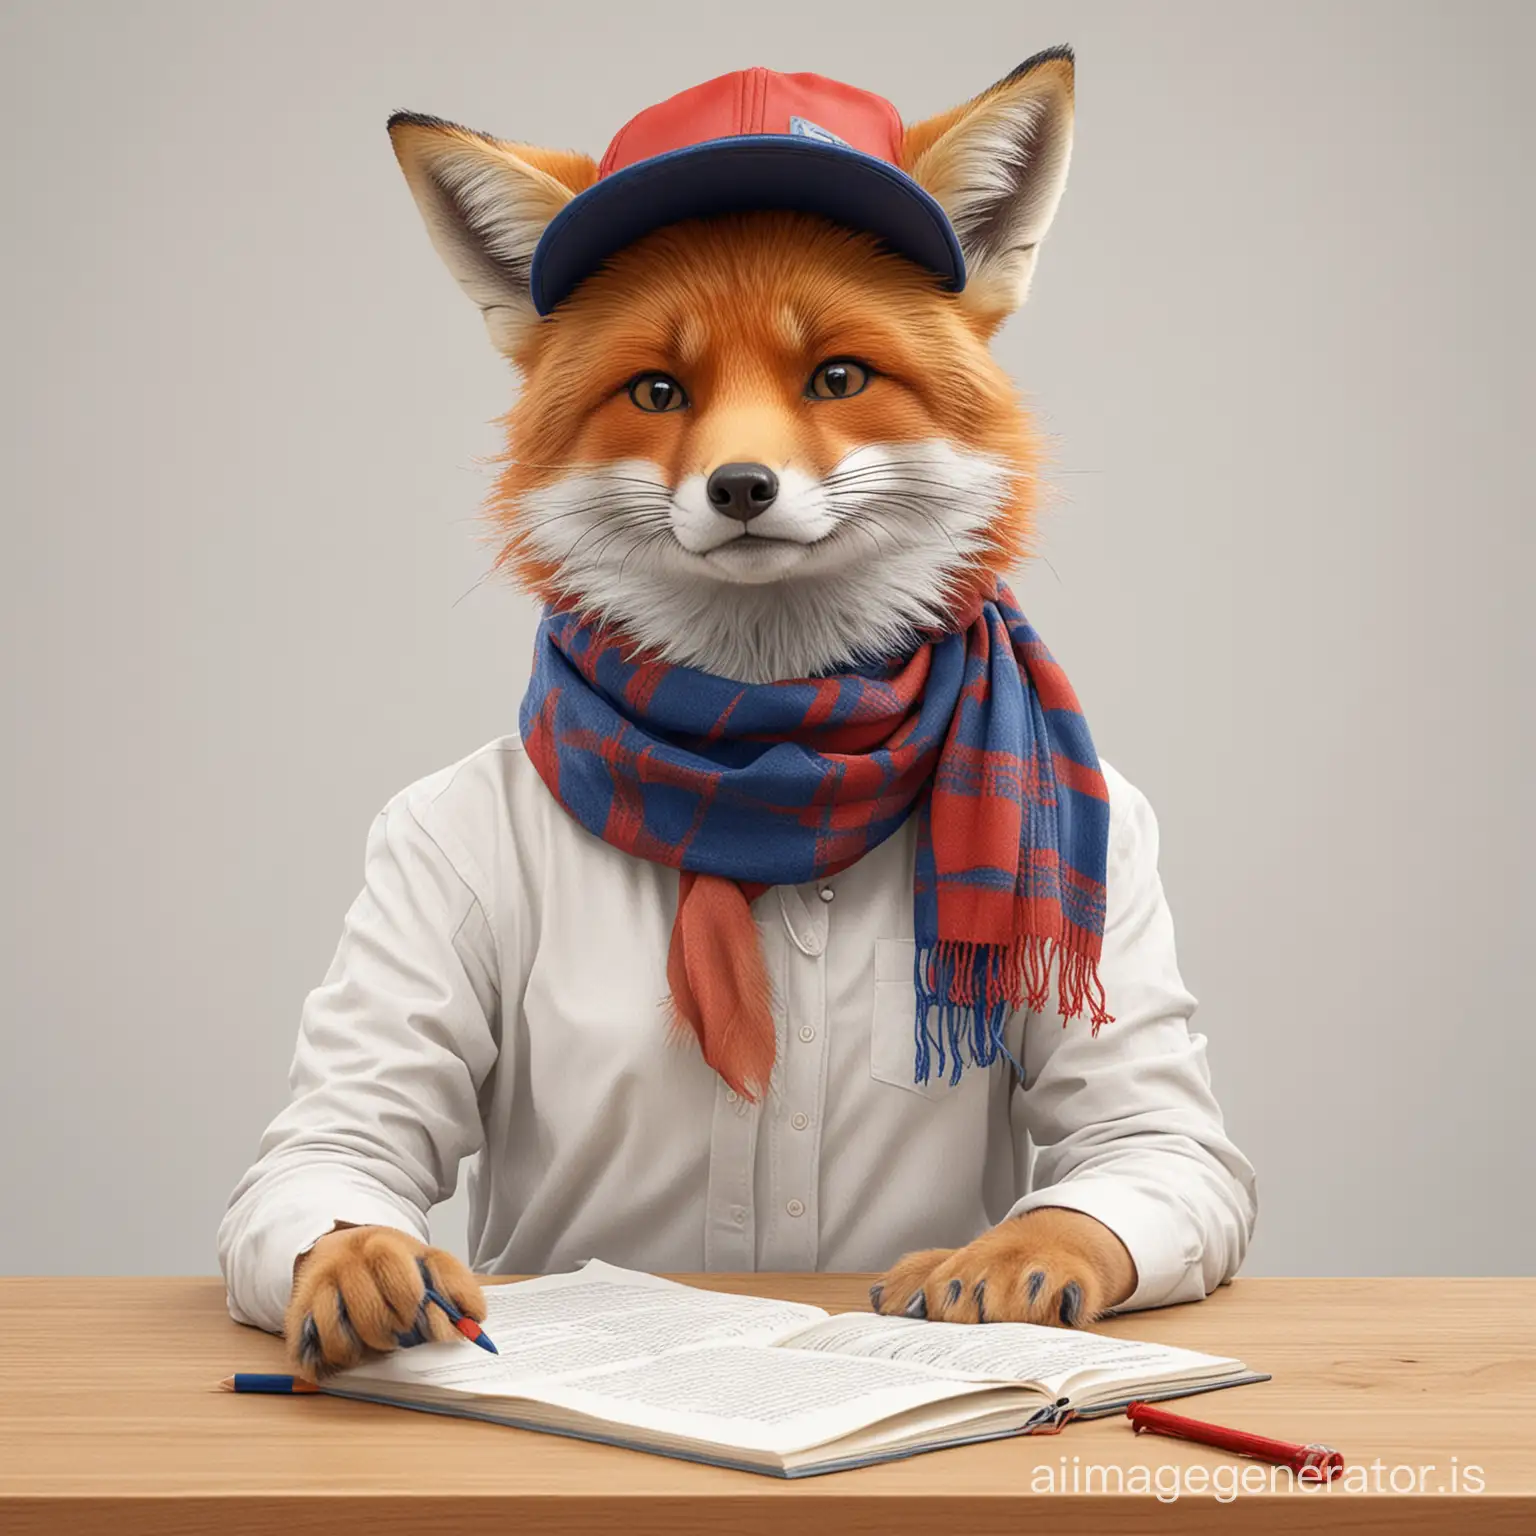 A cartoon image on a white background, a young female teenage fox dressed in street style, (a red and blue scarf is casually tied around her neck):1.5, sitting at a table and drawing in a notebook with colored pencils, a baseball cap on the fox's head, orange curly curls are visible from under the baseball cap, the fox looks bold and defiant, the fox winks at the viewer, street style, white background